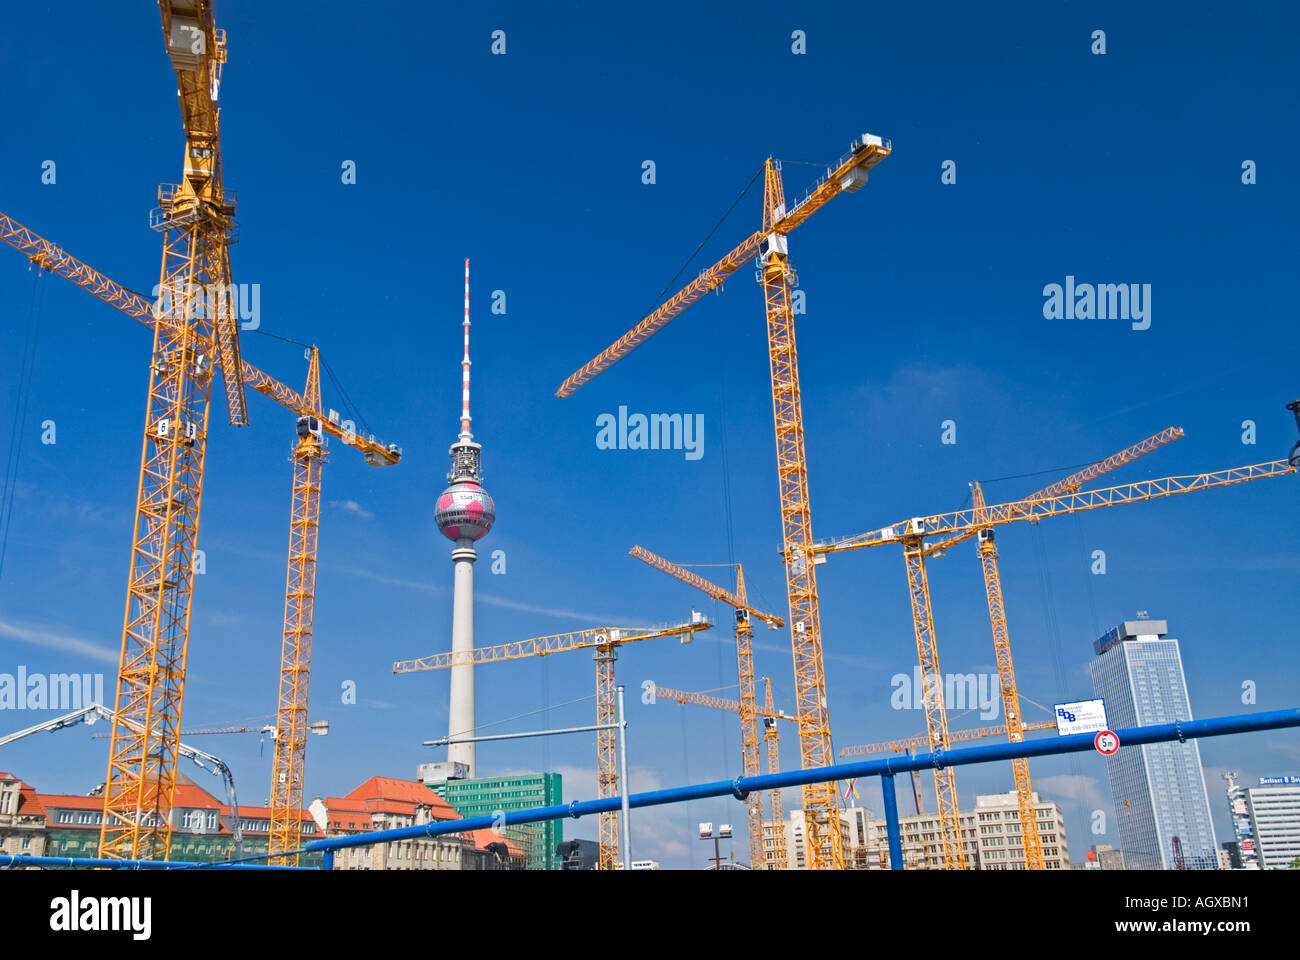 Tower cranes on a construction site in central Berlin Alexanderplatz  with television tower to rear Stock Photo